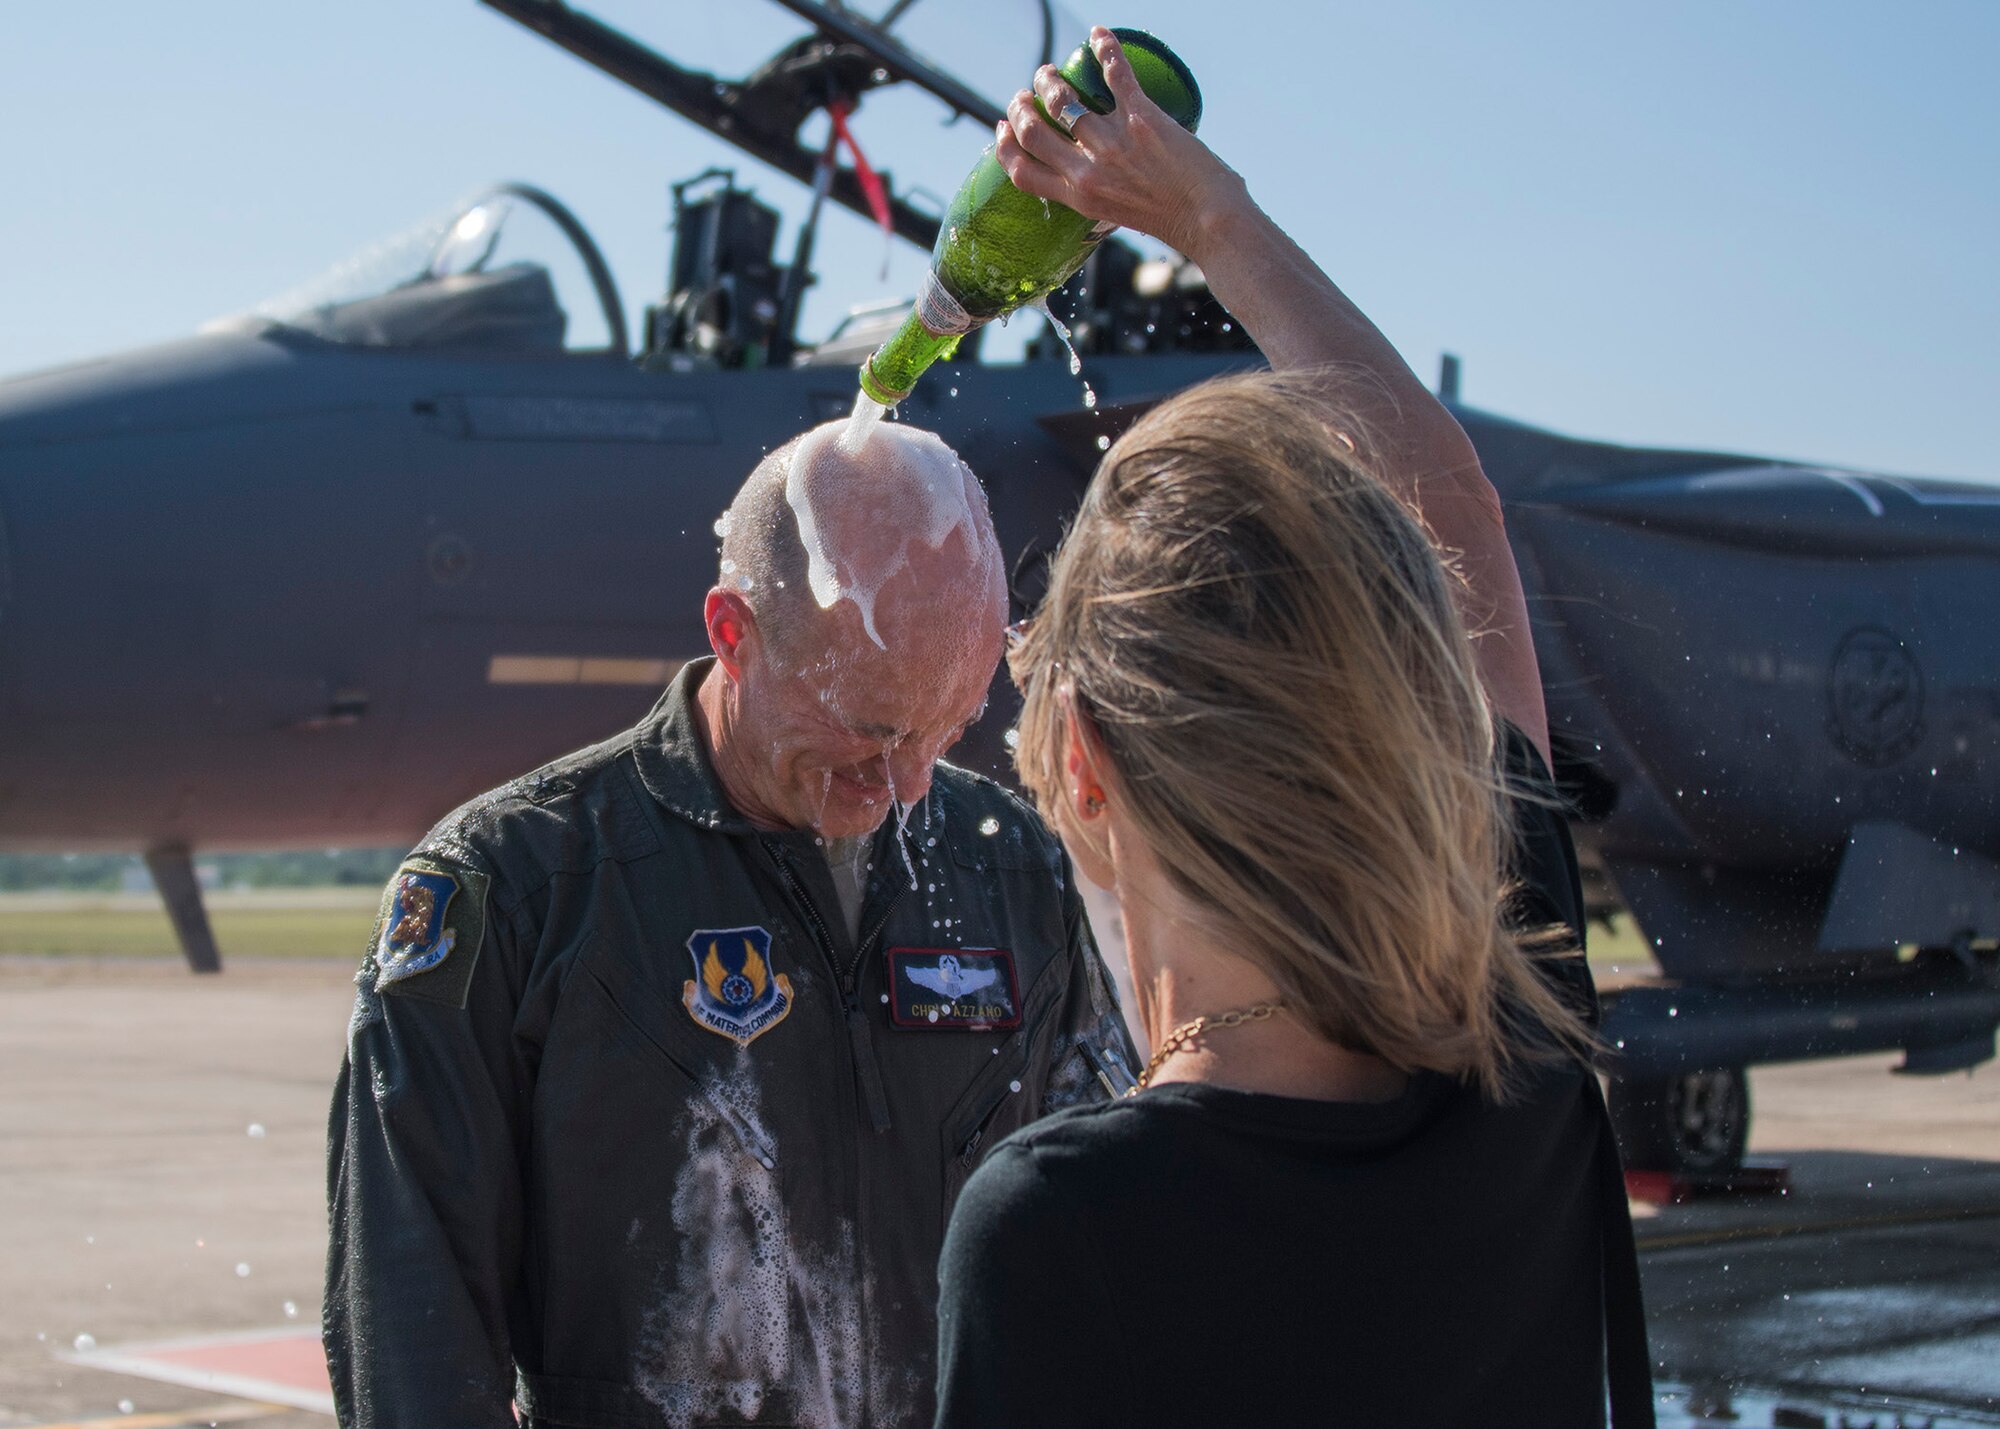 Jennifer Azzano, pours a celebratory bottle of champagne on her husband, Brig. Gen. Christopher Azzano, 96th Test Wing commander, during his fini flight at Eglin Air Force Base, Fla. May 15. The fini flight is a symbol of a member’s final flight with the unit or base. Azzano’s new assignment will take him to Wright-Patterson Air Force Base in Ohio to take command of the Directorate of Air, Space and Cyberspace Operations. (U.S. Air Force photo/Ilka Cole) 